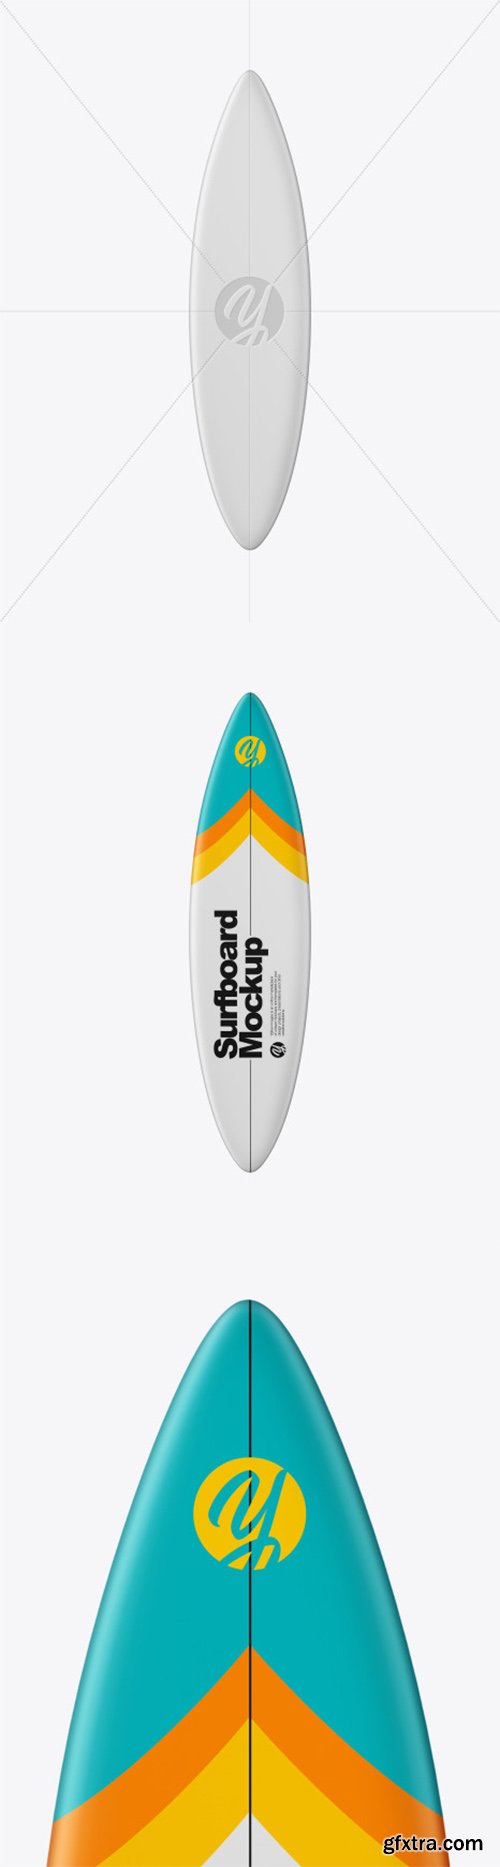 Surfboard Mockup - Front View 51856